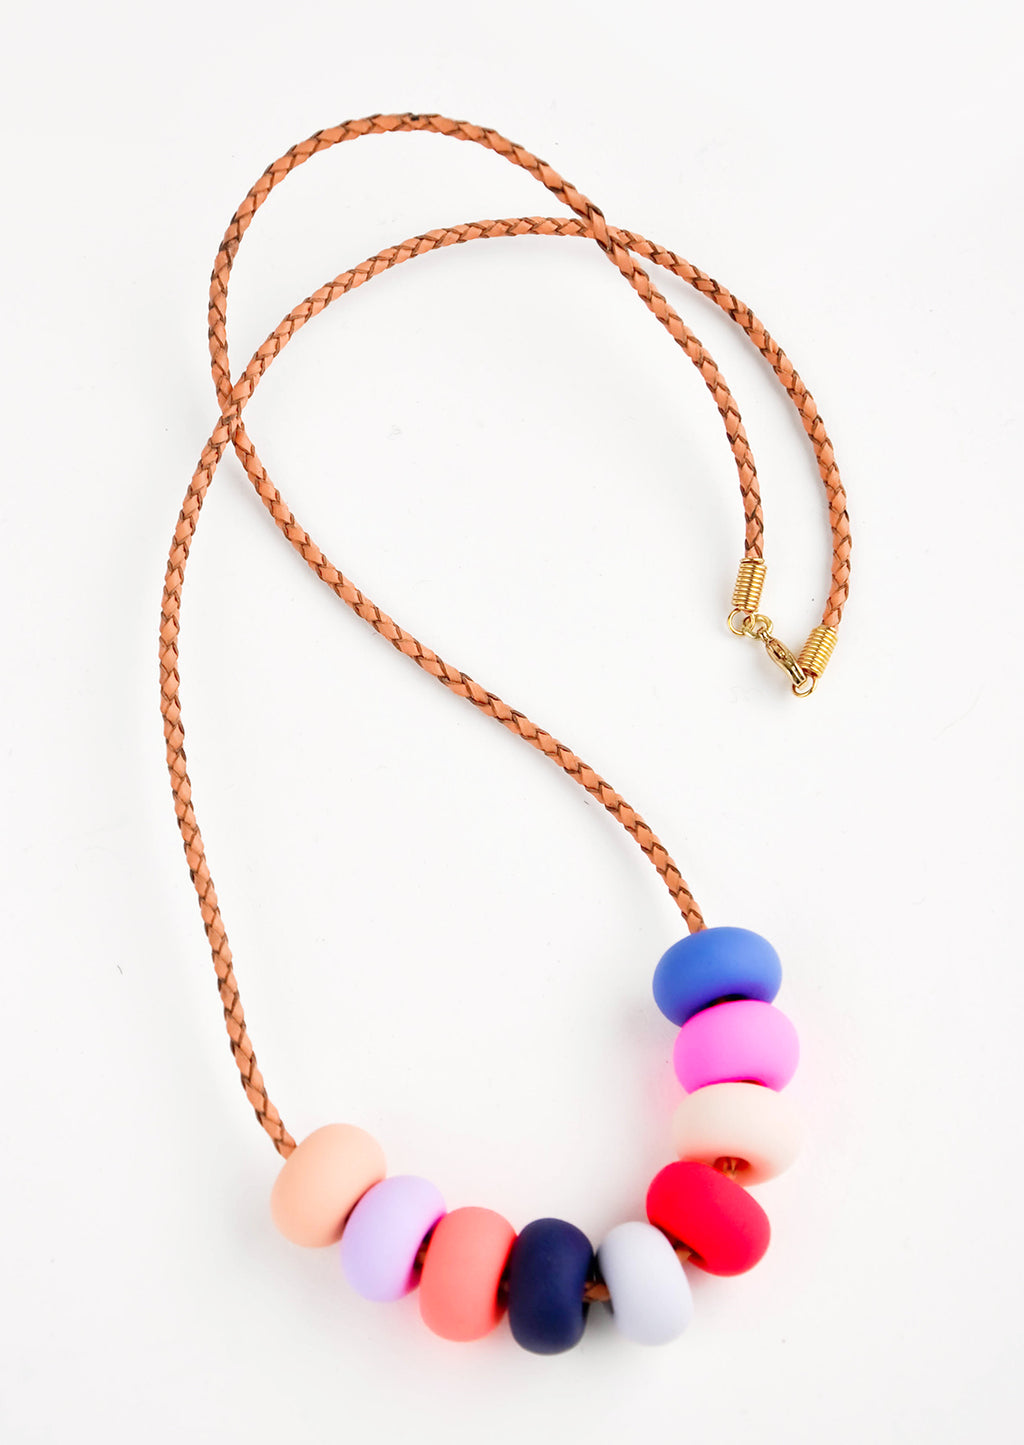 Tropical Fruit: Woven leather cord necklace with gold clasp and rounded clay beads pinks, reds, blues, and purple.